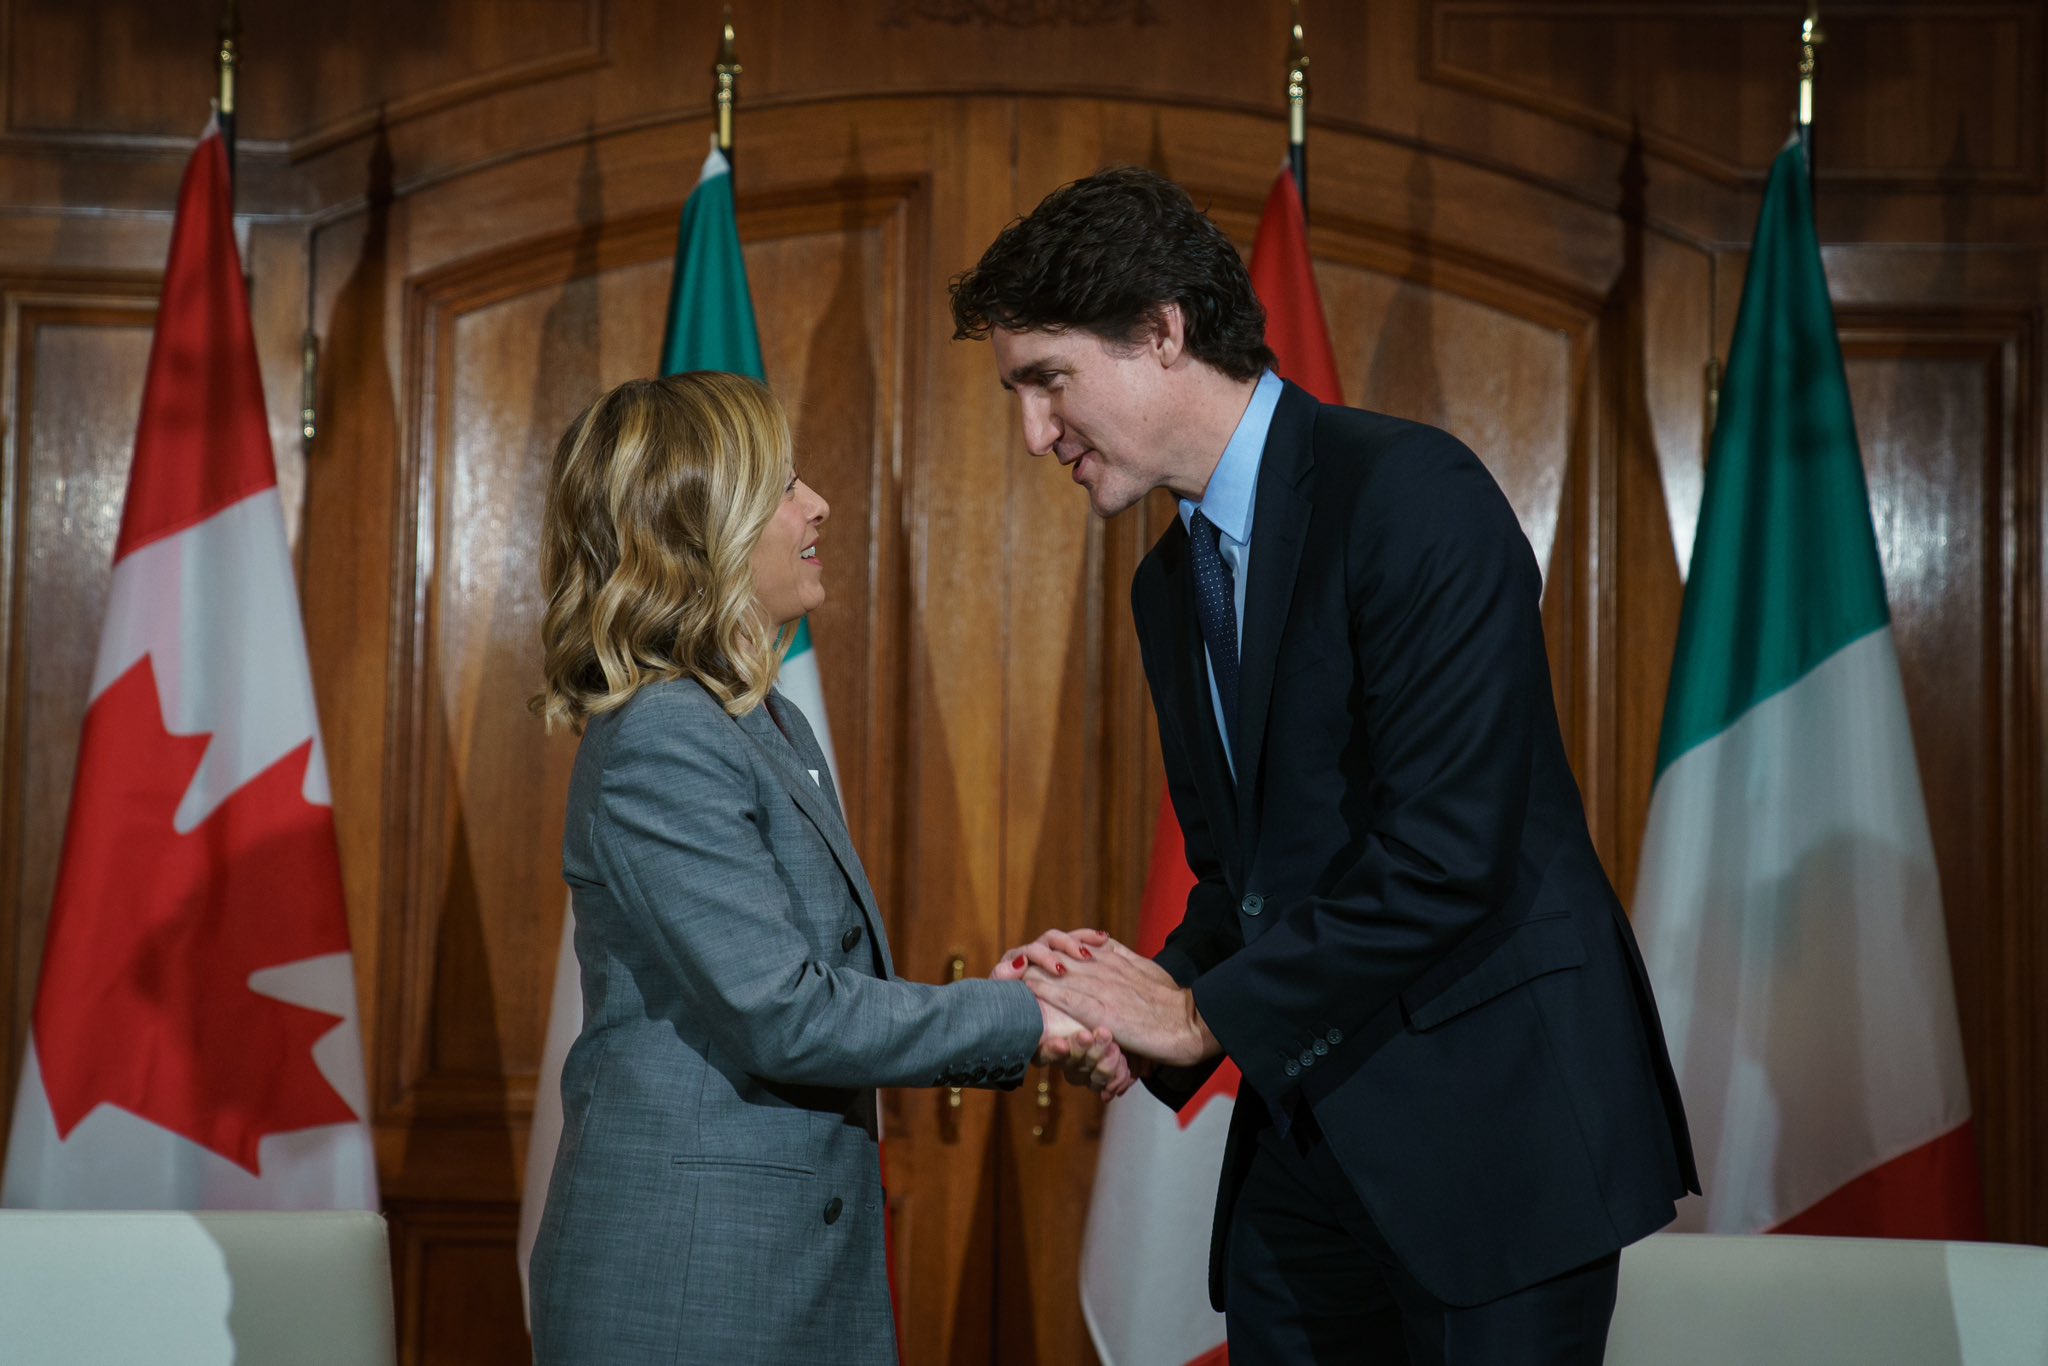 Prime Minister Justin Trudeau and Prime Minister Giorgia Meloni are standing and shaking hands. Prime Minister Trudeau is speaking and Prime Minister Meloni is smiling. Two Canadian flags and two Italian flags are displayed behind them.